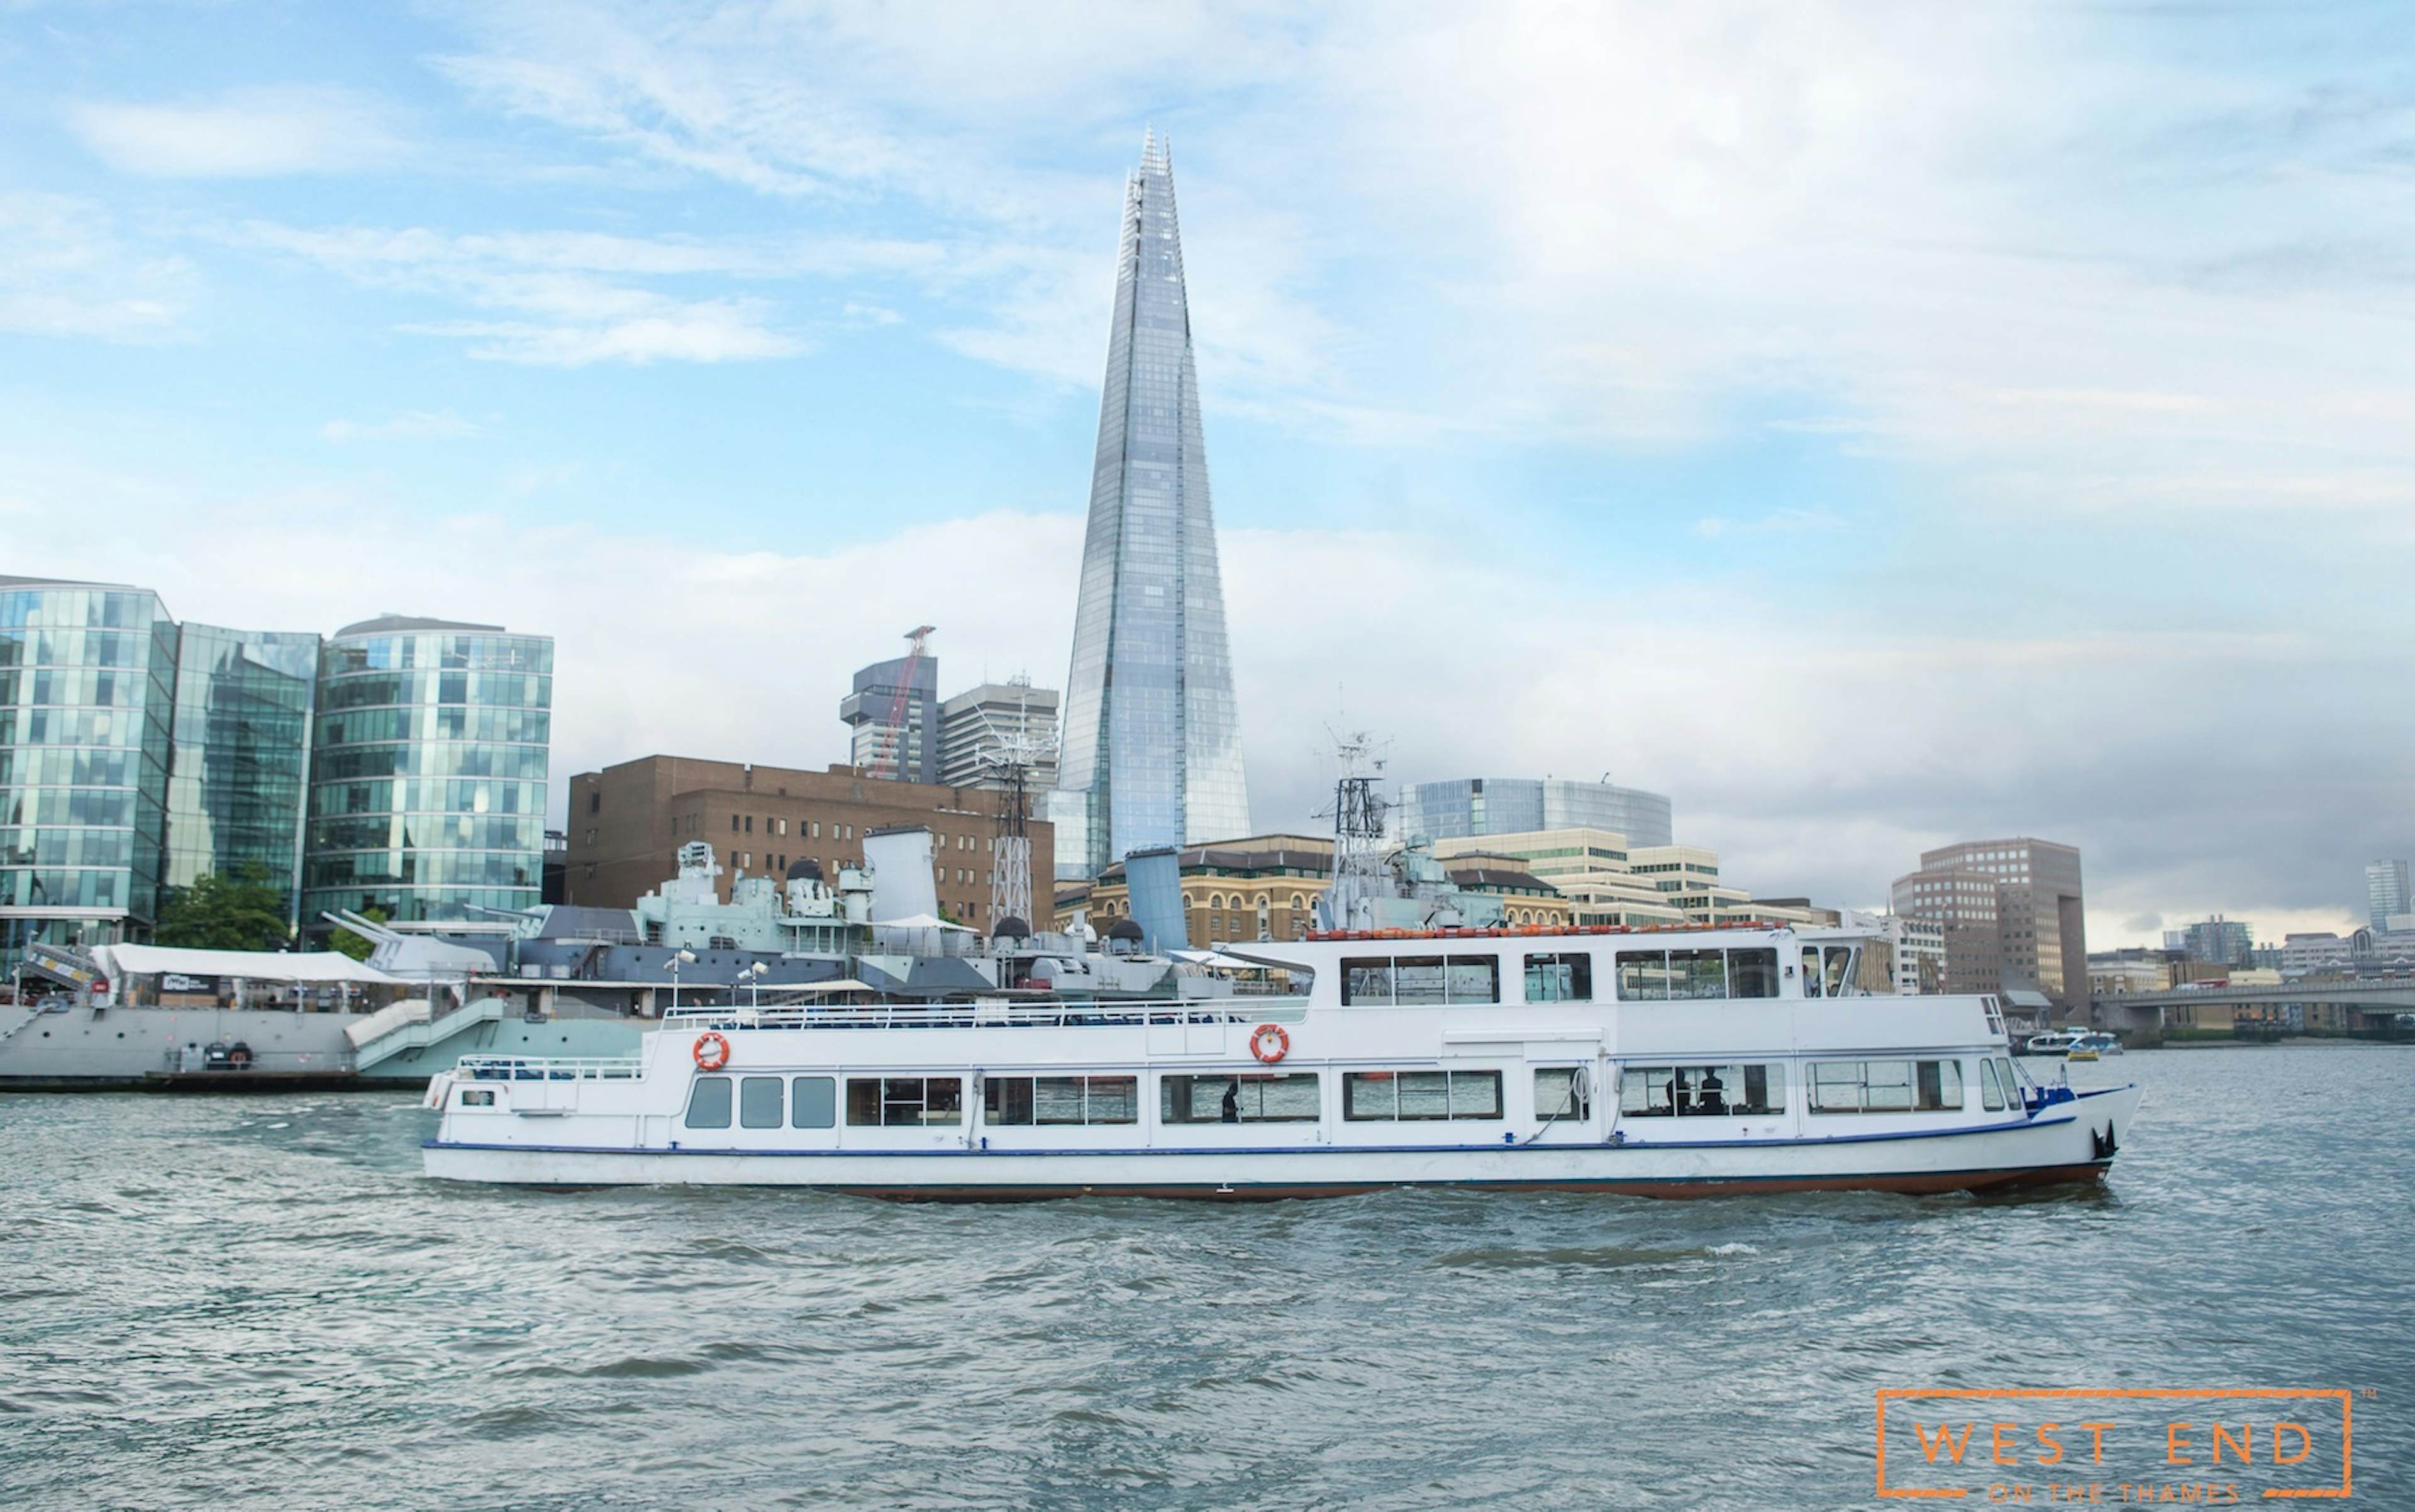 West End on the Thames - The Vessel image 1